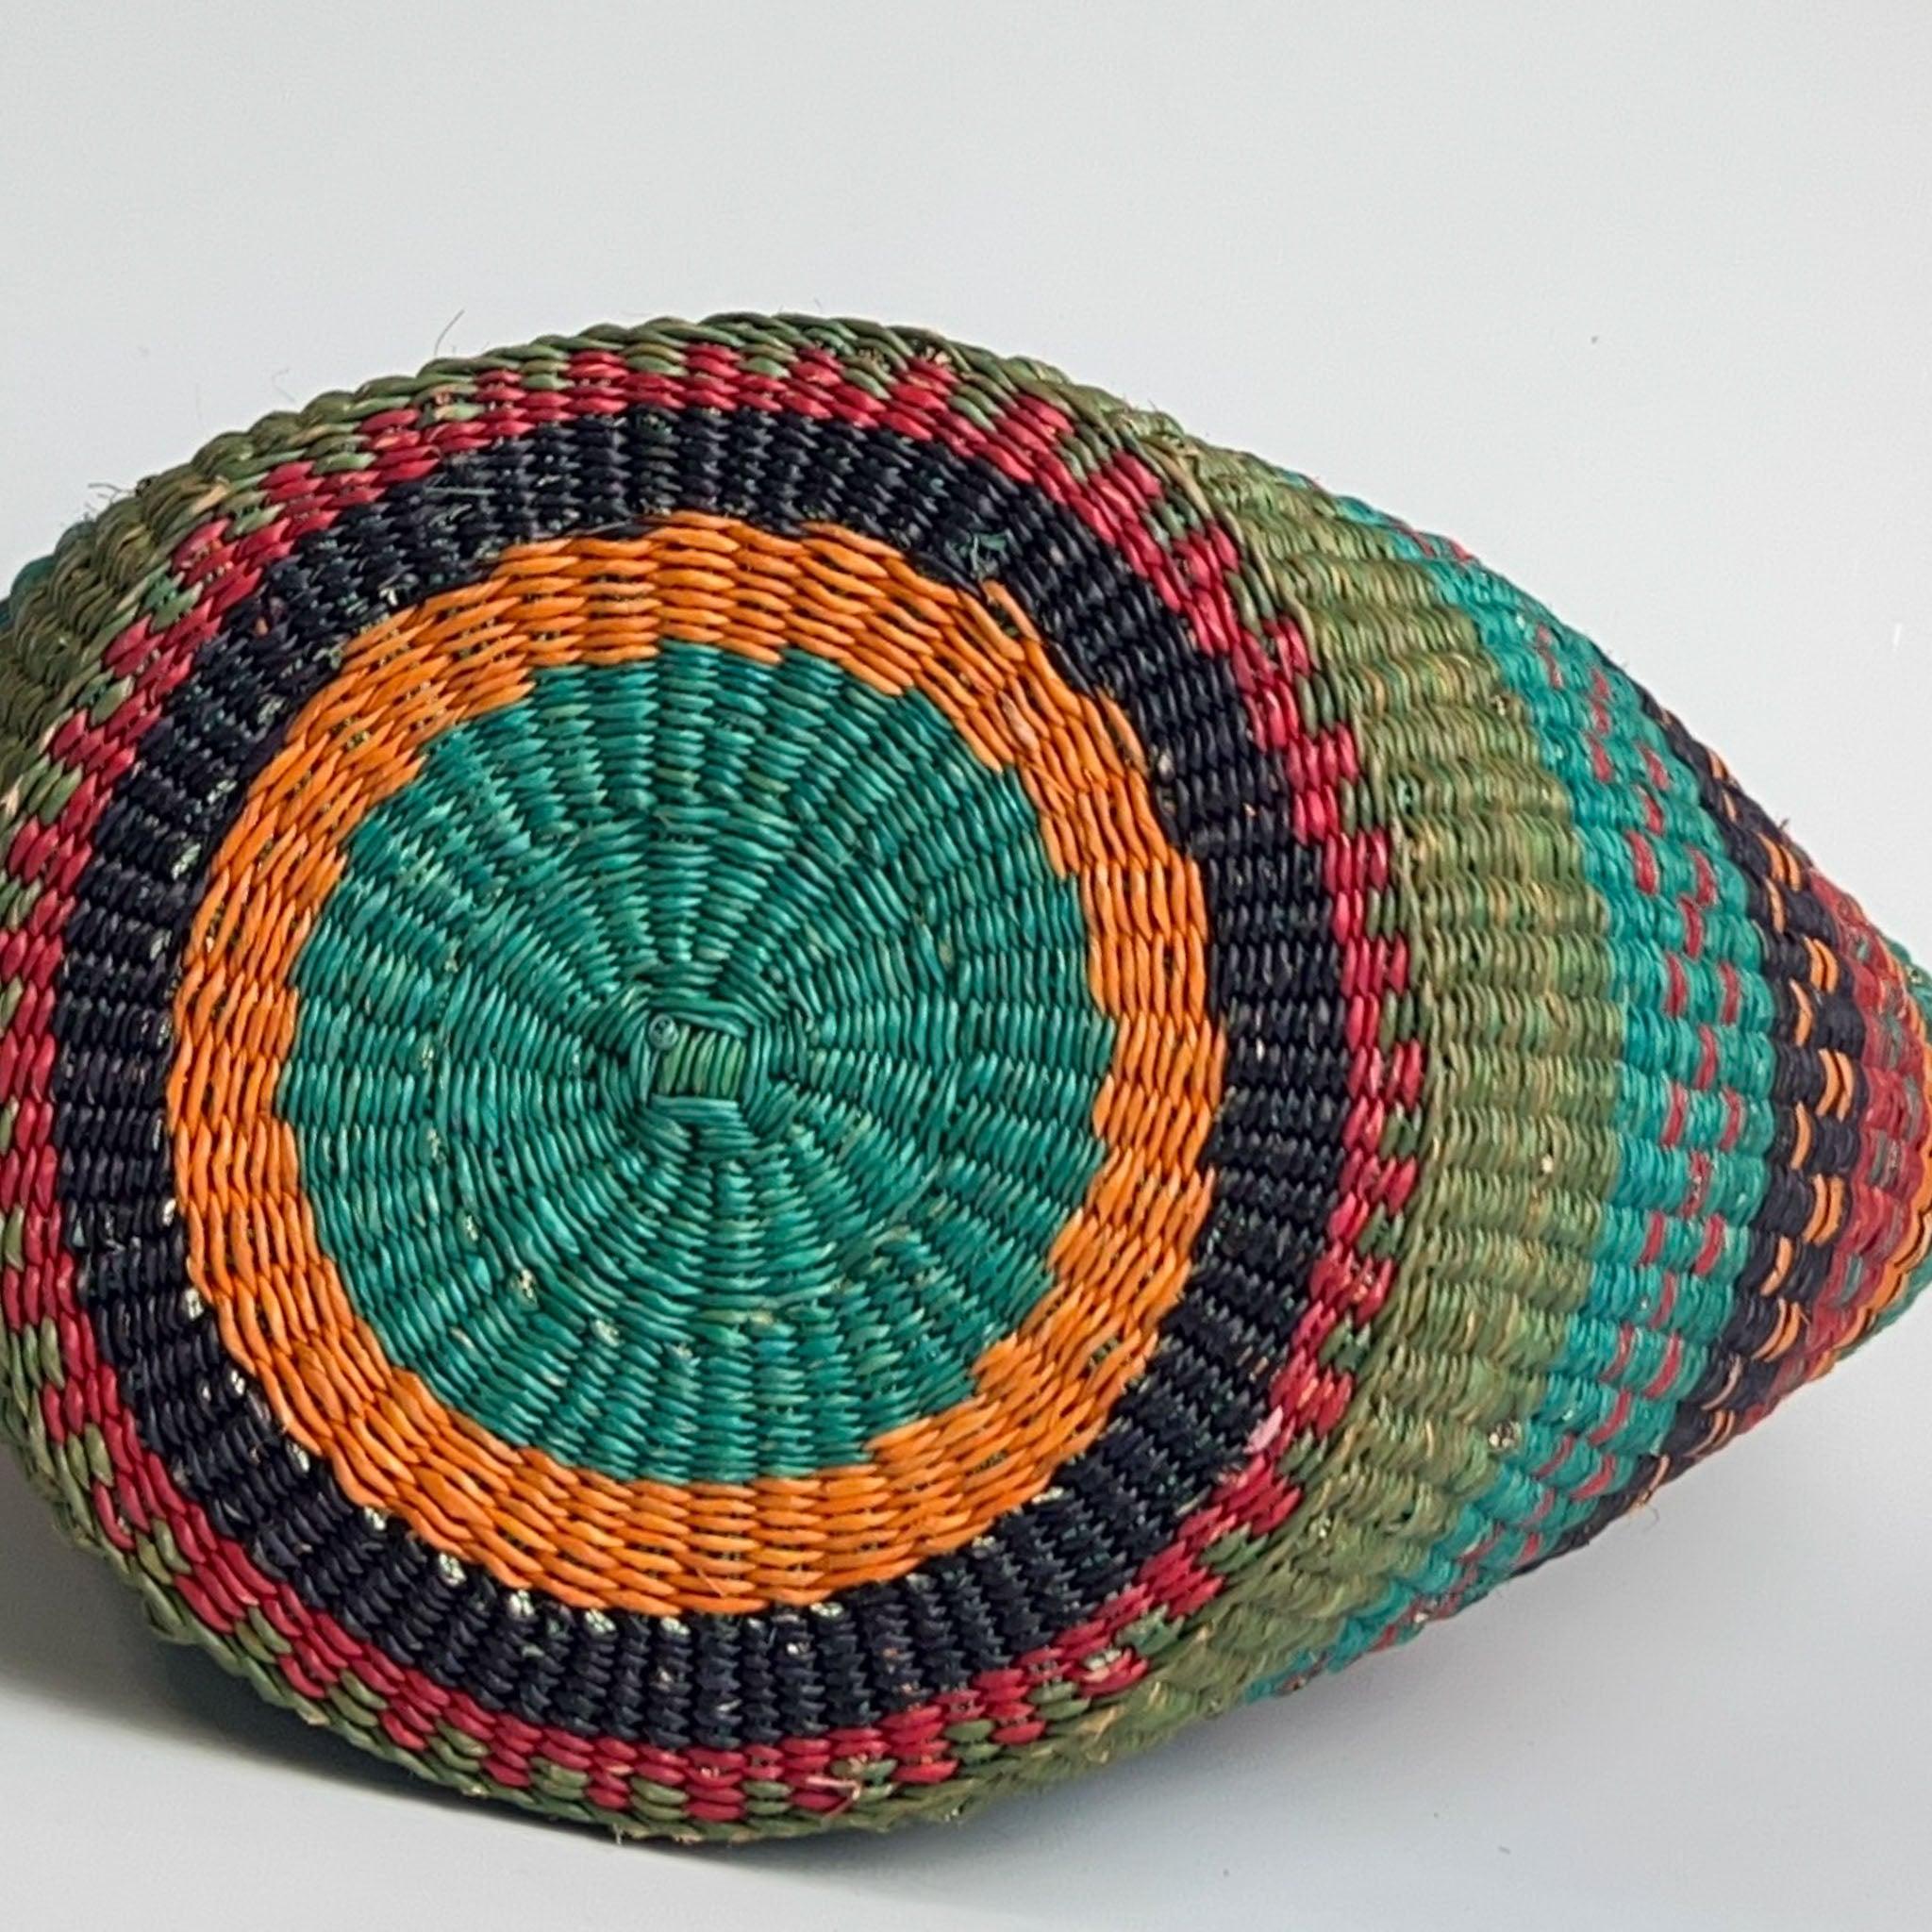 Base of attractive traditional African basket showing off a colourful design of blue, orange and teal.